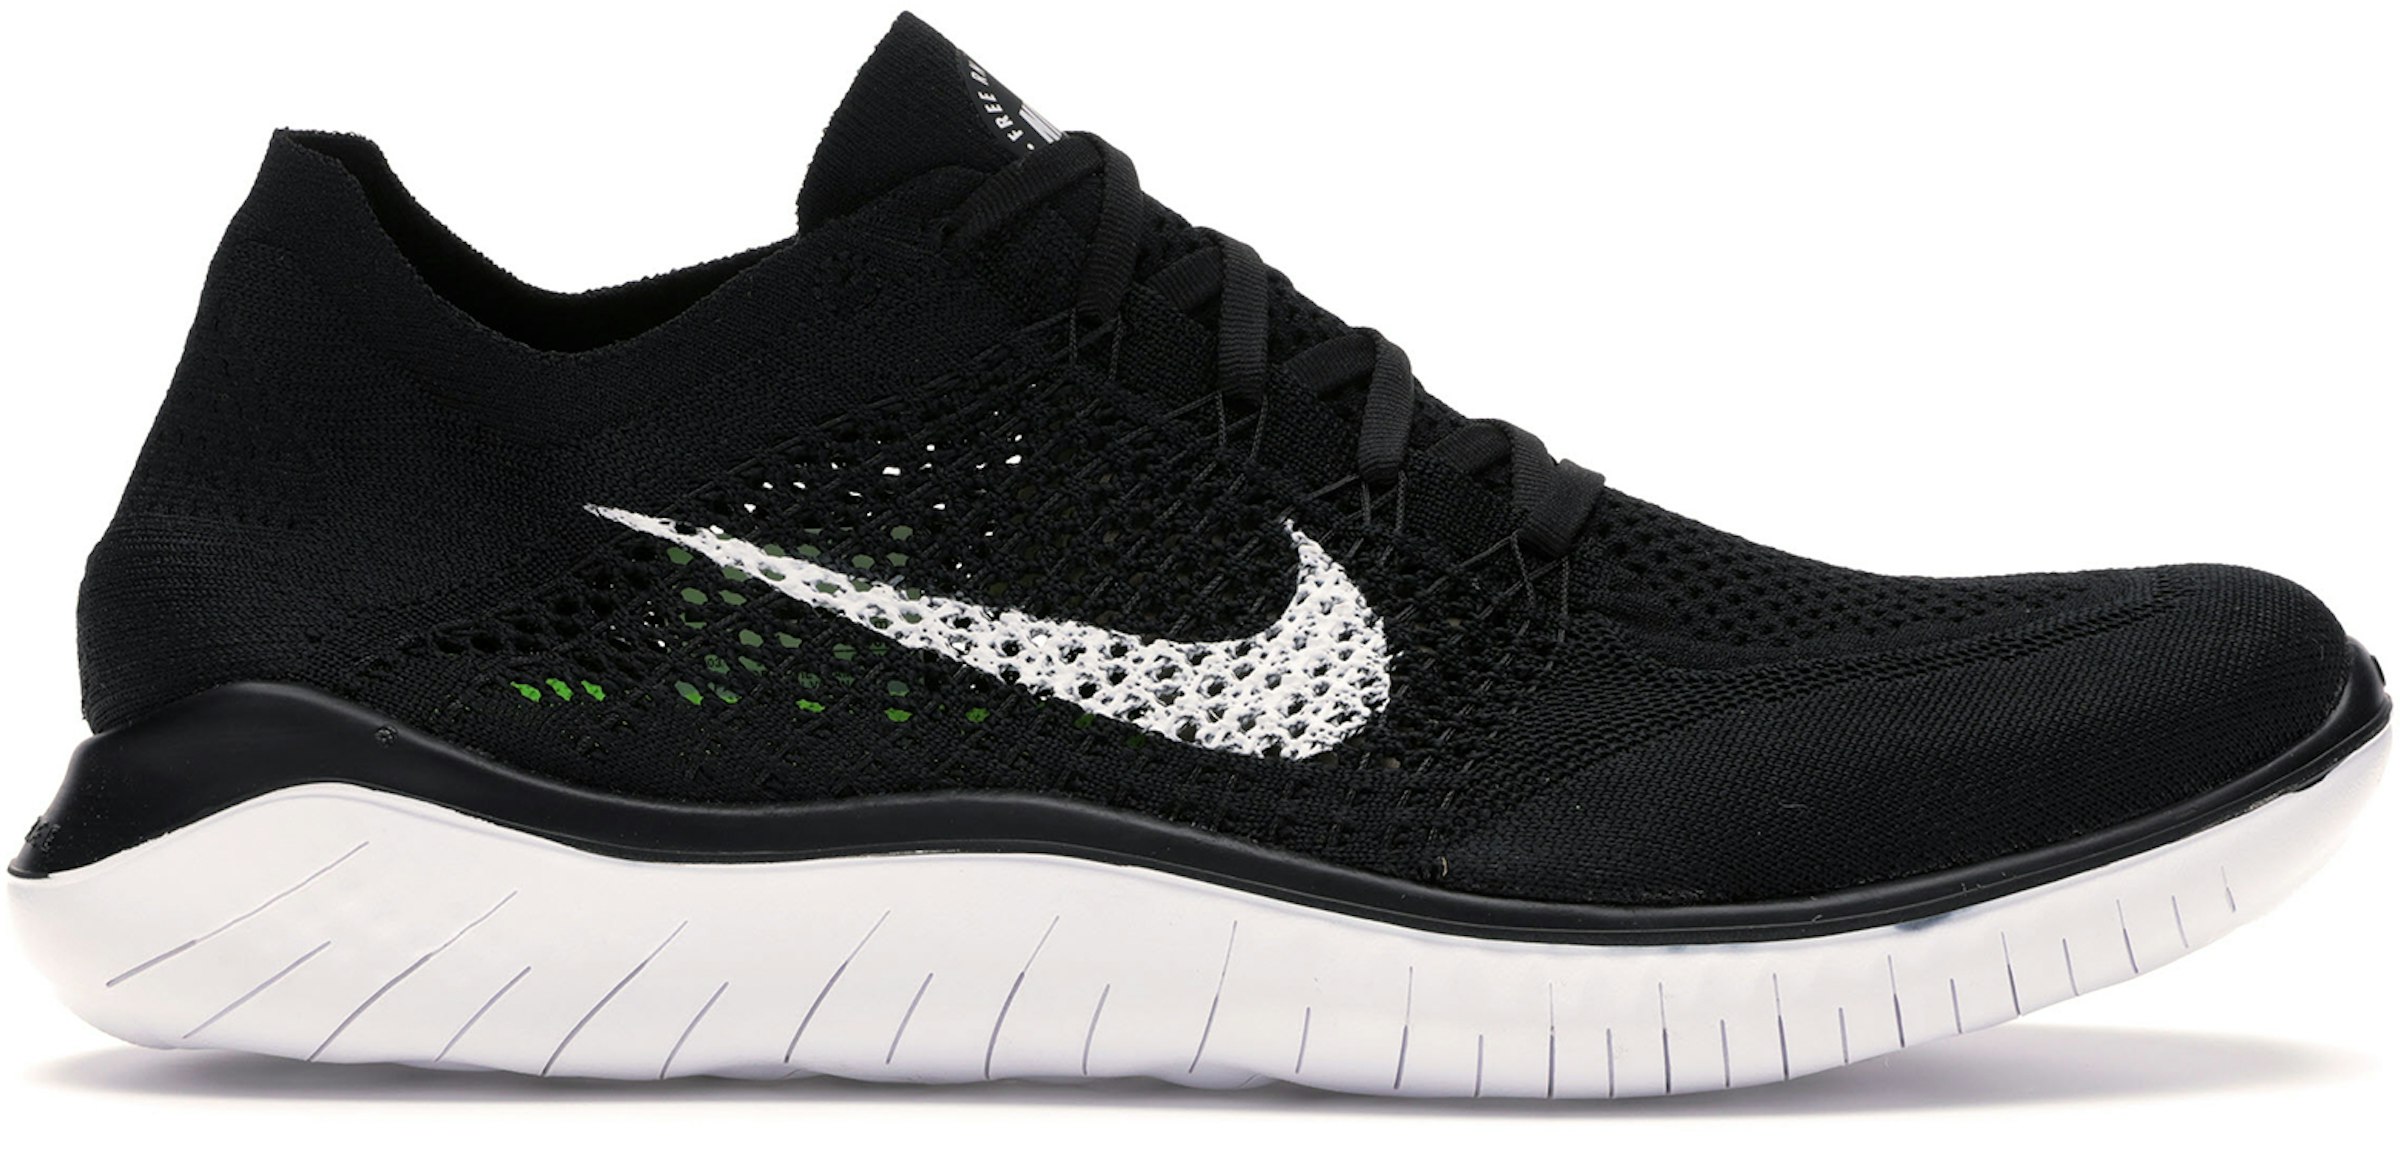 Anual Imperial Competidores Nike Free RN Flyknit 2018 Black White Men's - 942838-001 - US